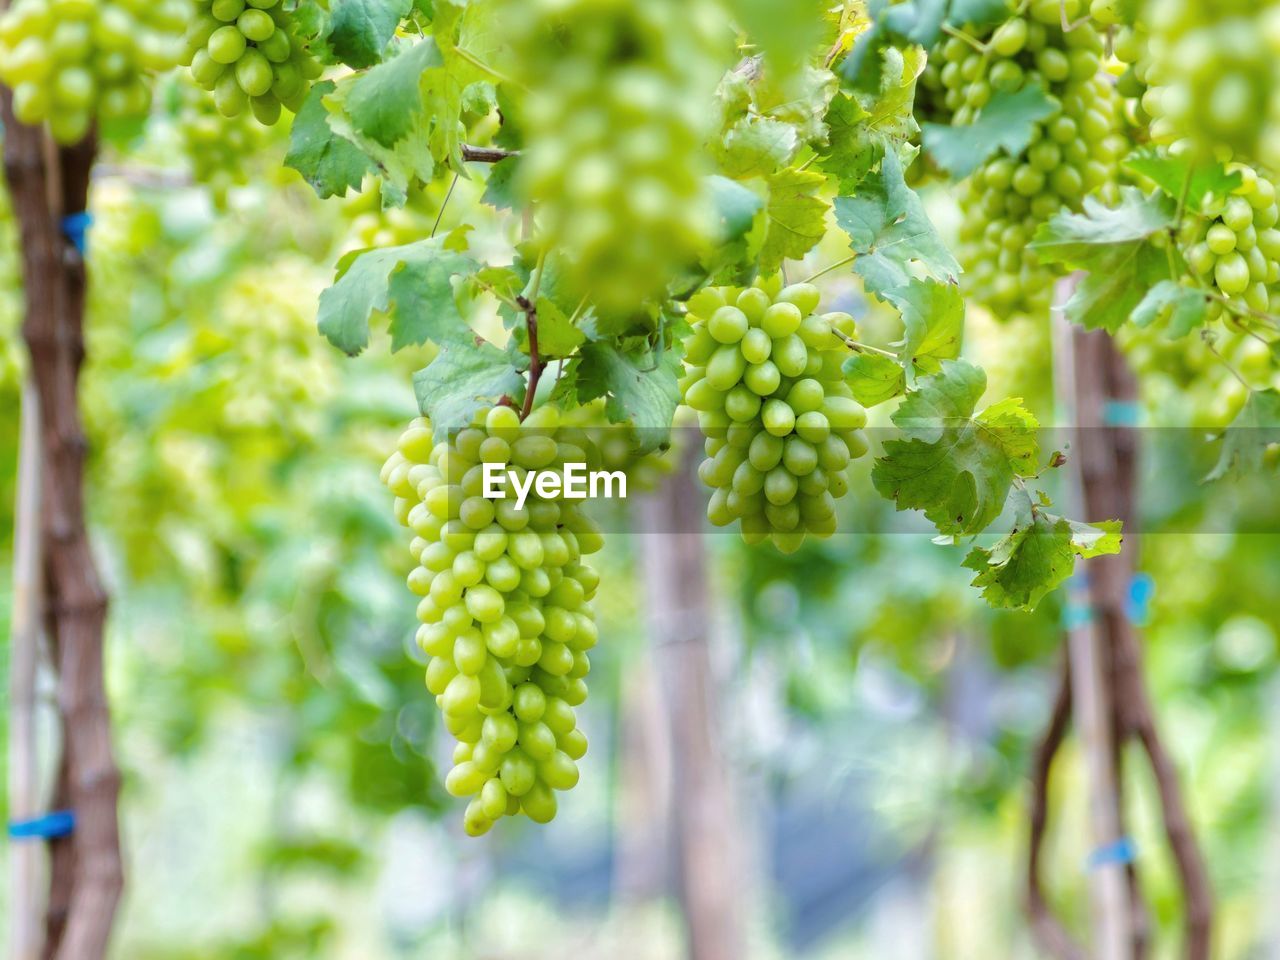 CLOSE-UP OF GRAPES IN VINEYARD